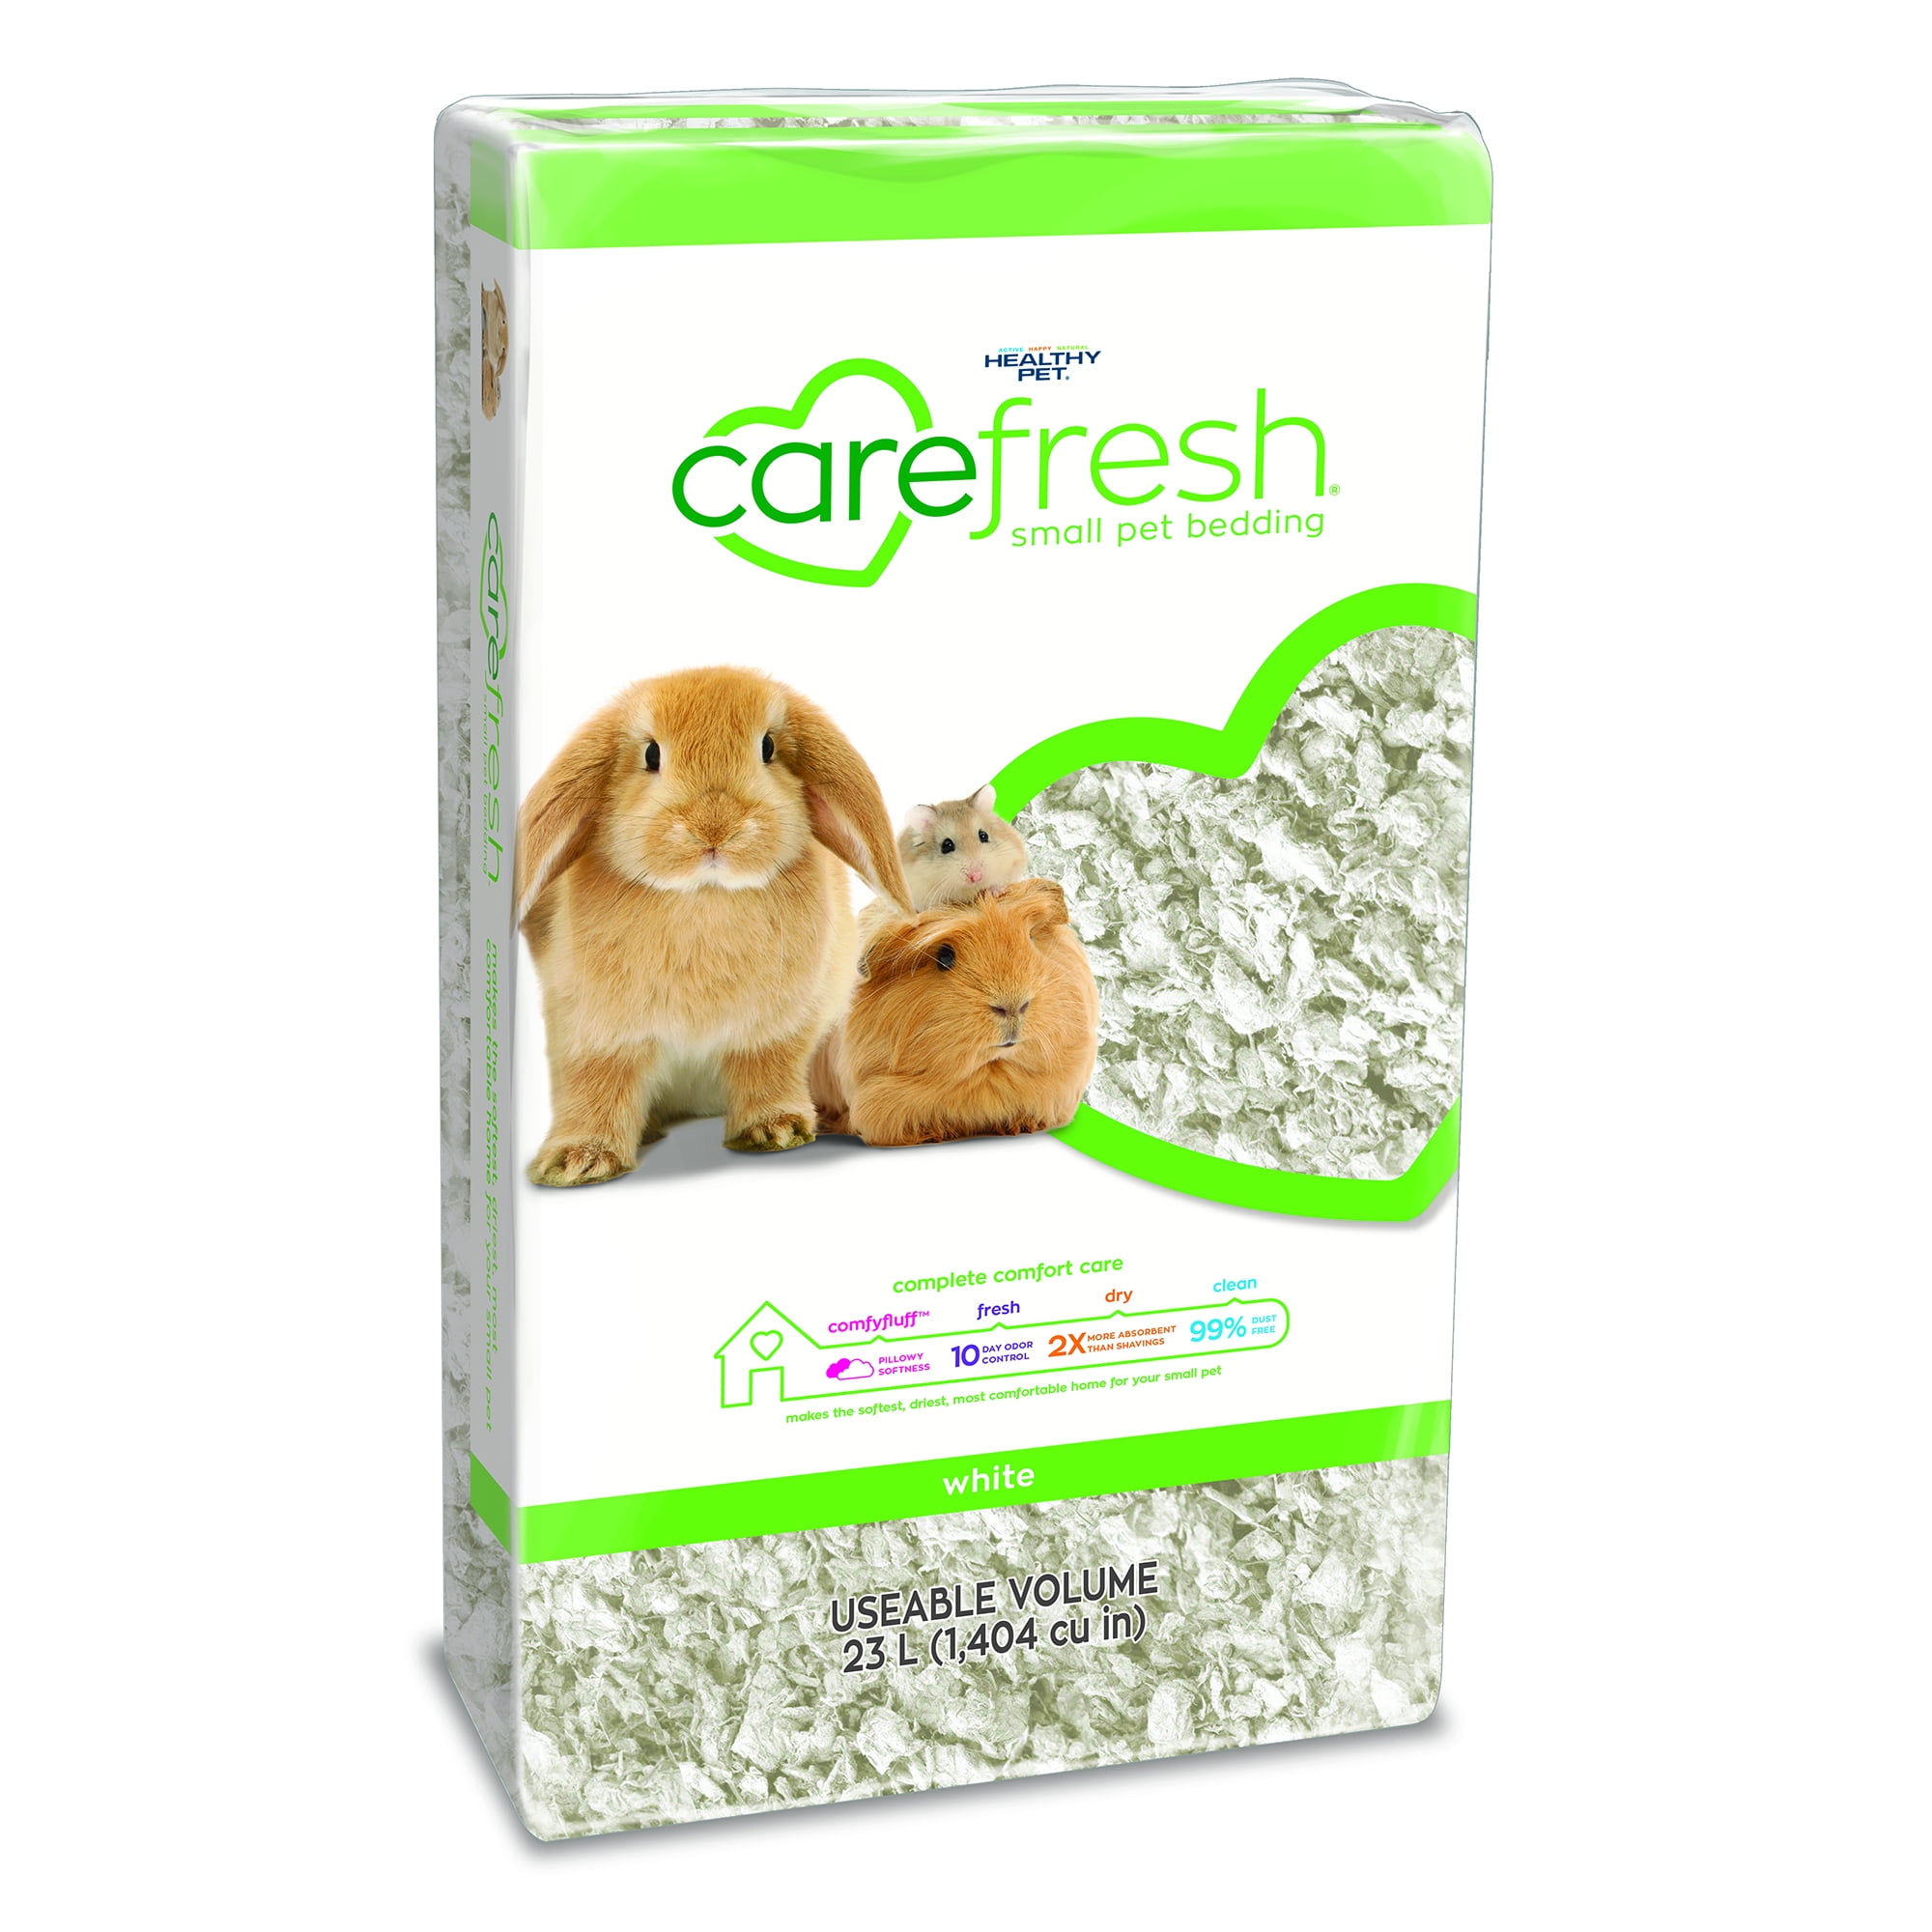 paper bedding for guinea pigs